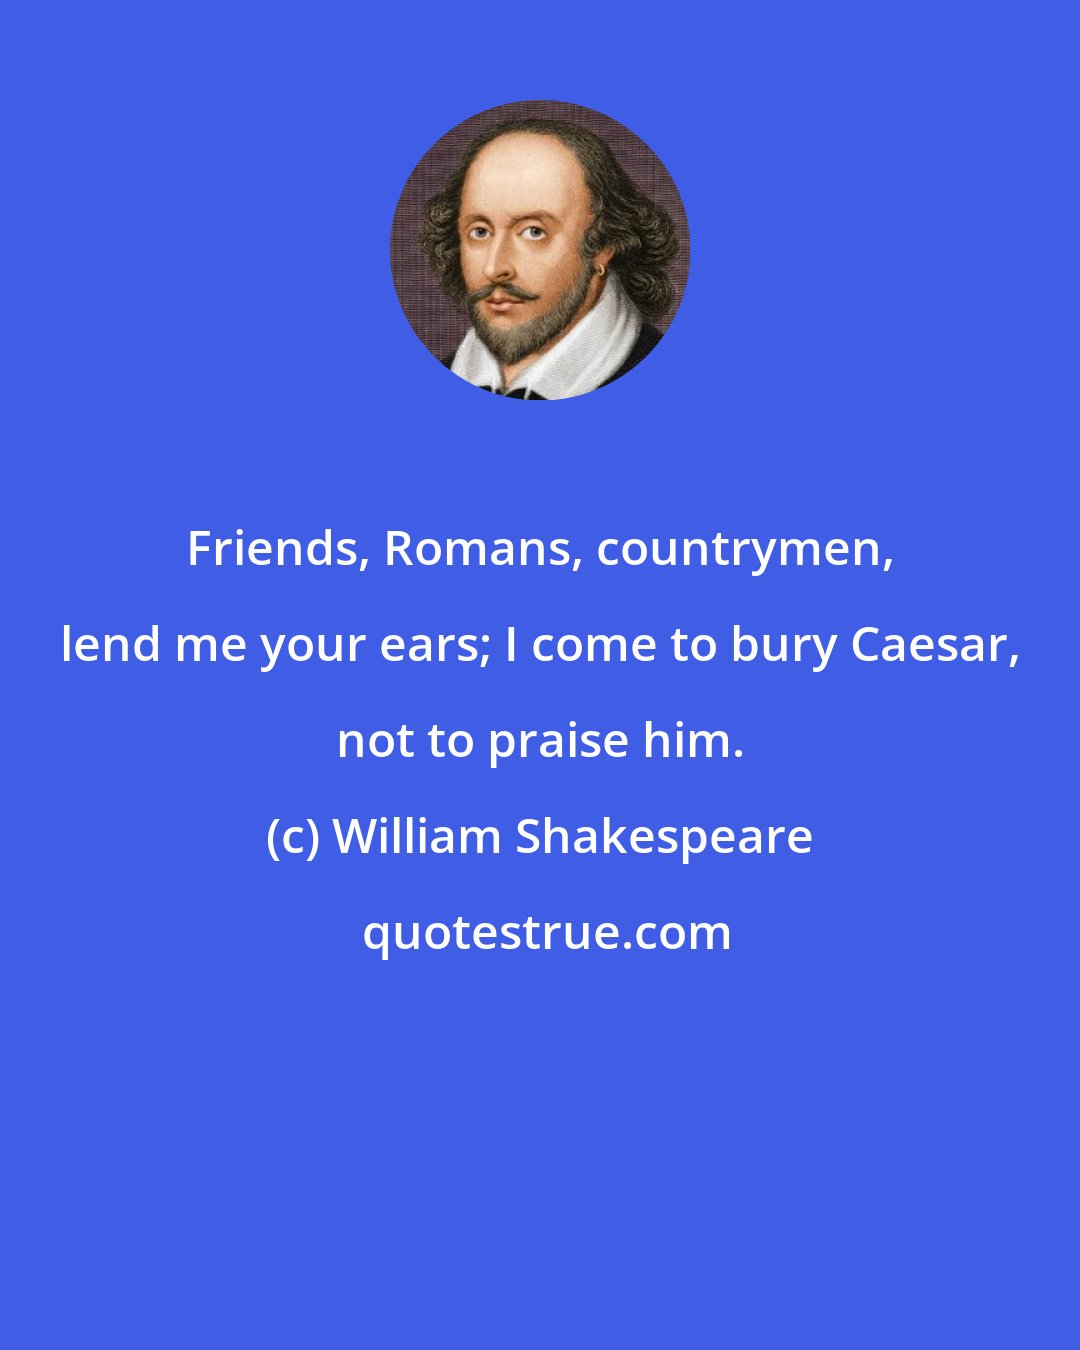 William Shakespeare: Friends, Romans, countrymen, lend me your ears; I come to bury Caesar, not to praise him.